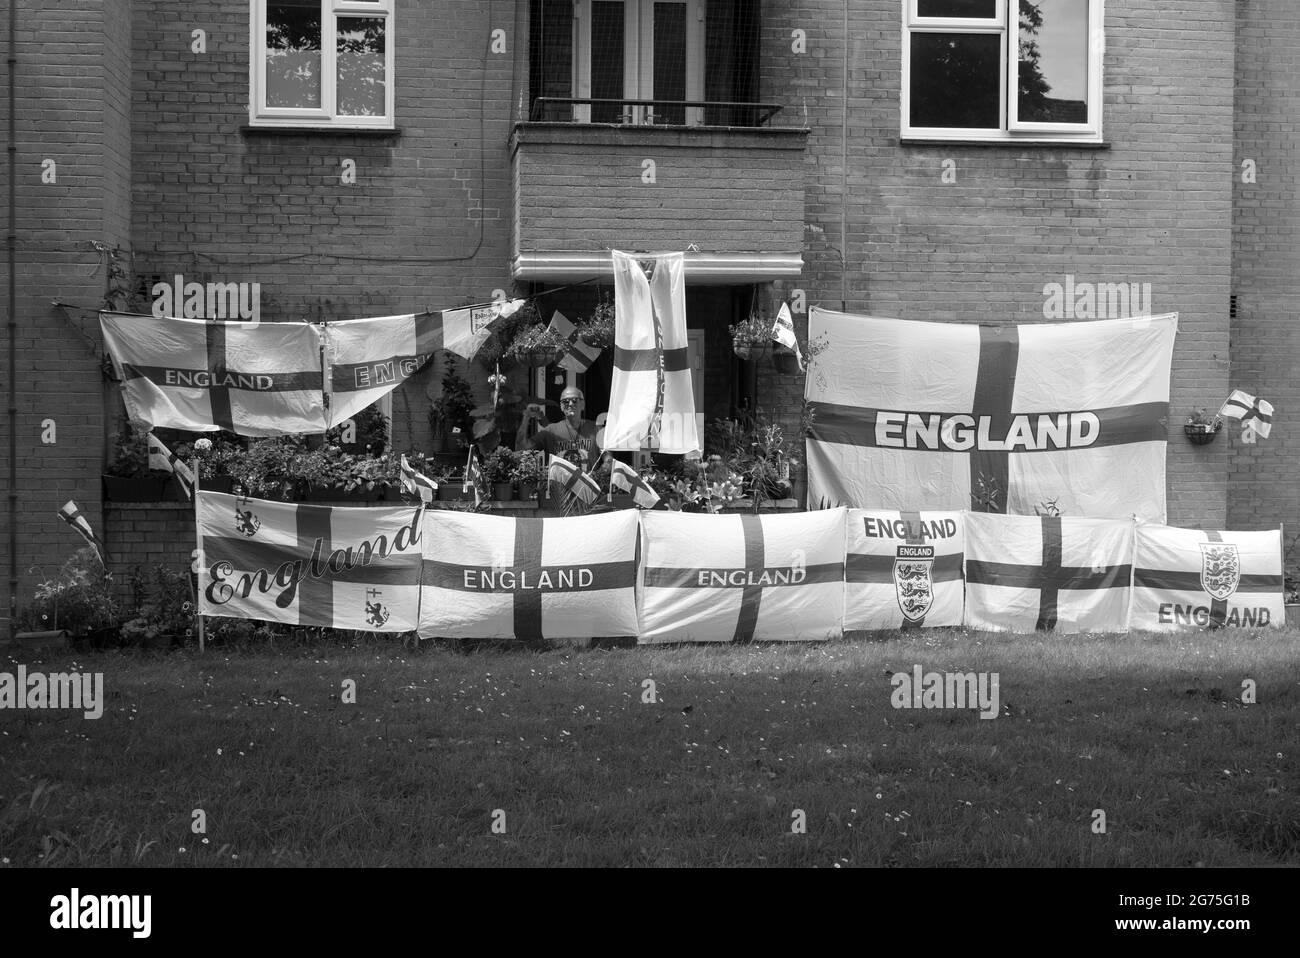 Throughout the England people are showing their colours and wishing a repeat of 1966 World Cup. A man dresses his home in flags in support of England winning the UEFA European football Championship. Stock Photo